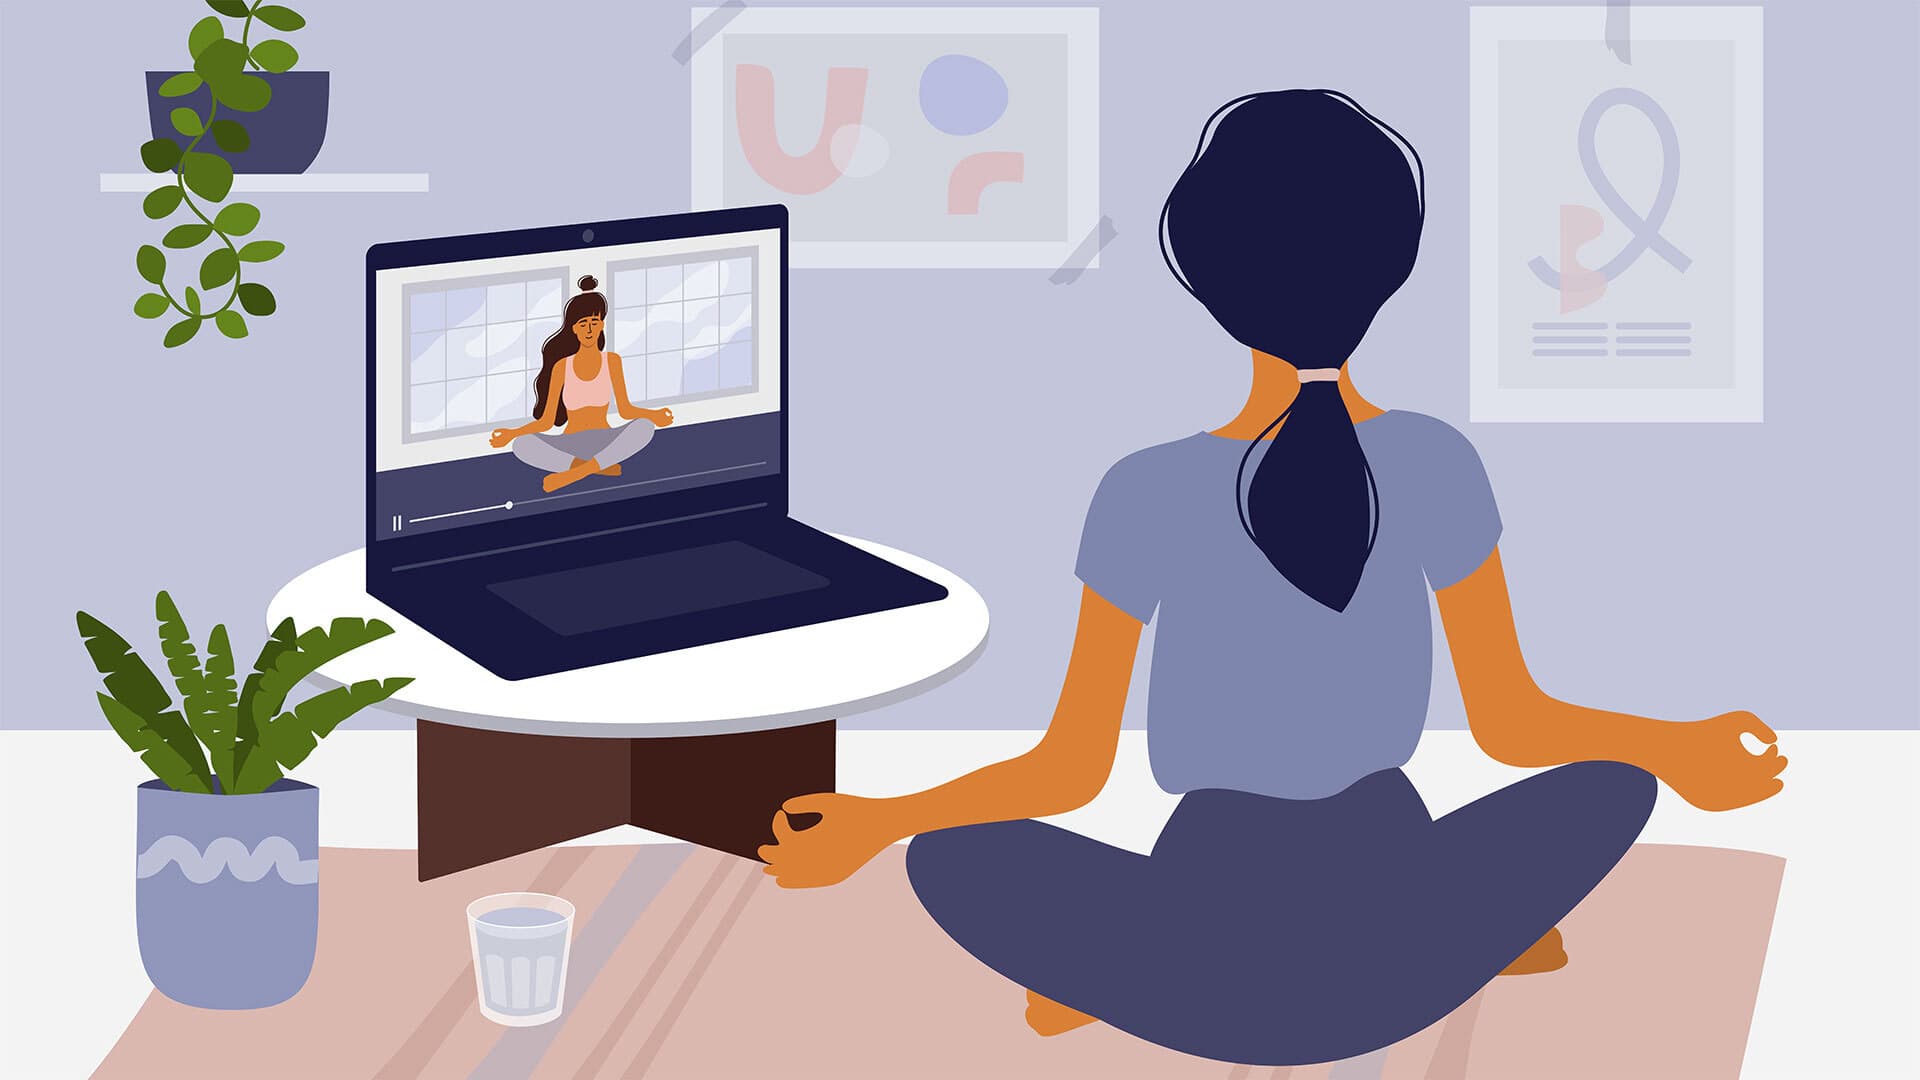 Illustration of woman participating in virtual yoga